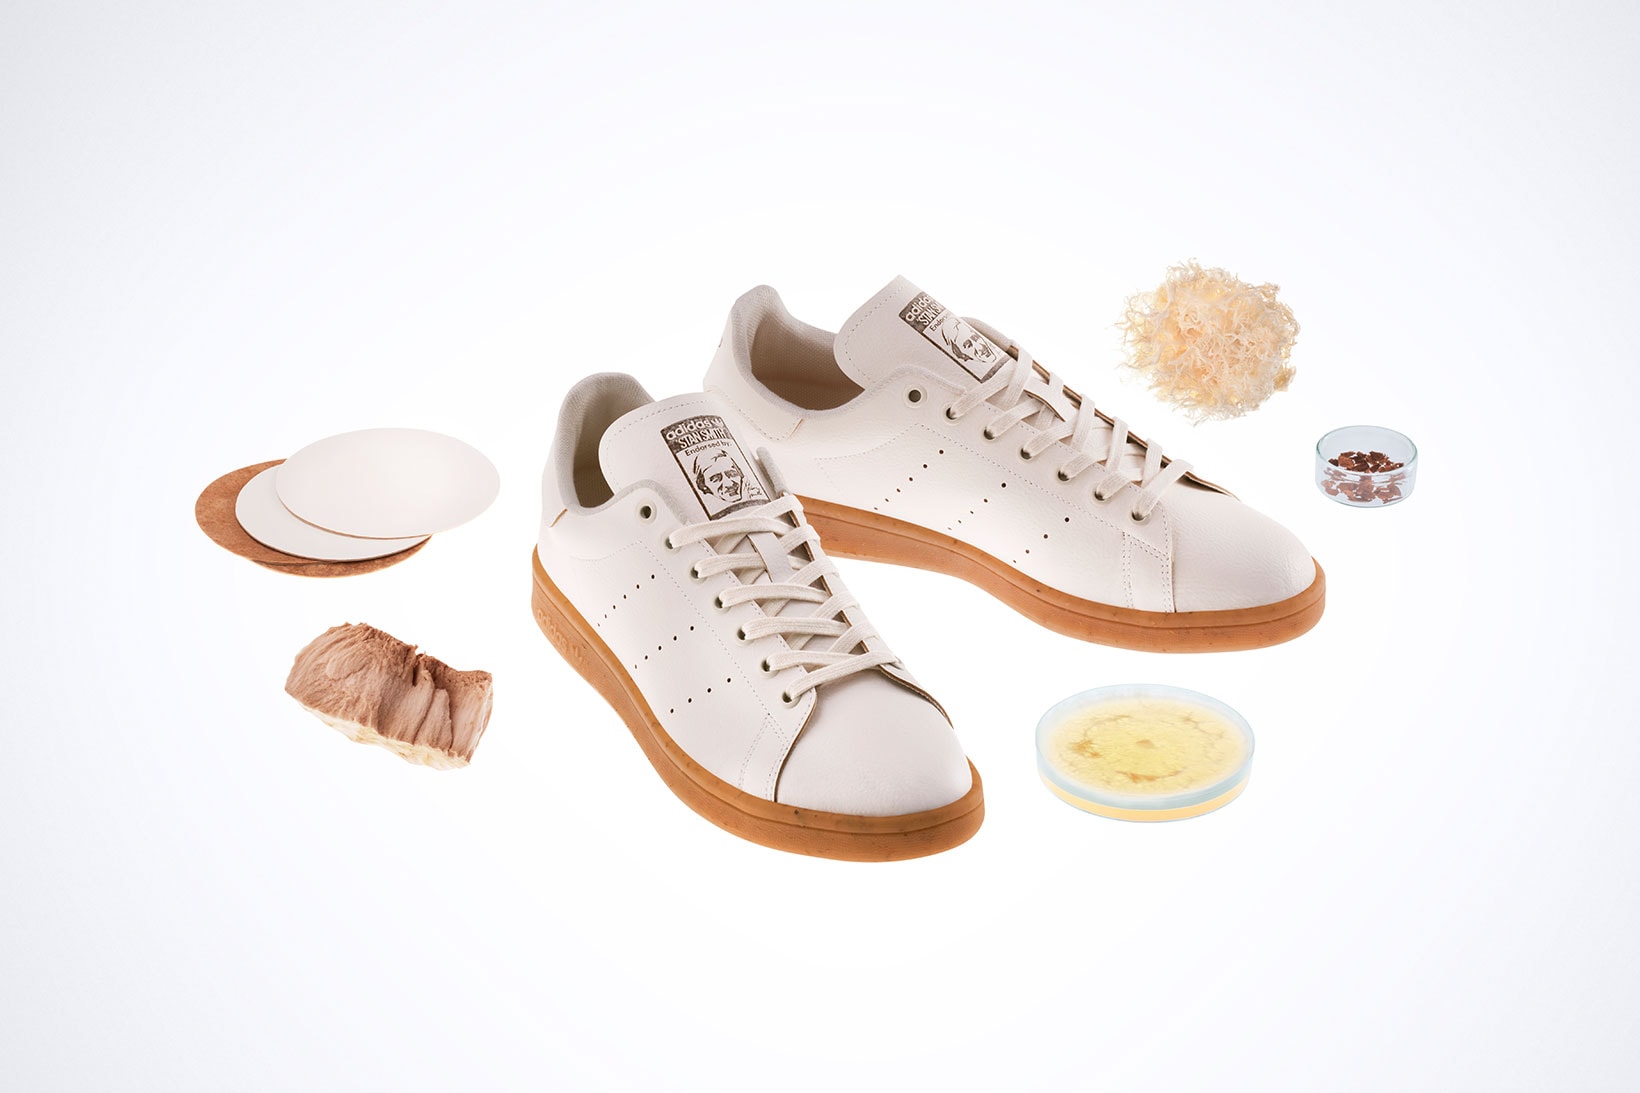 adidas stan smith mylo mushroom leather sneakers concept shoe details upper laterals toe